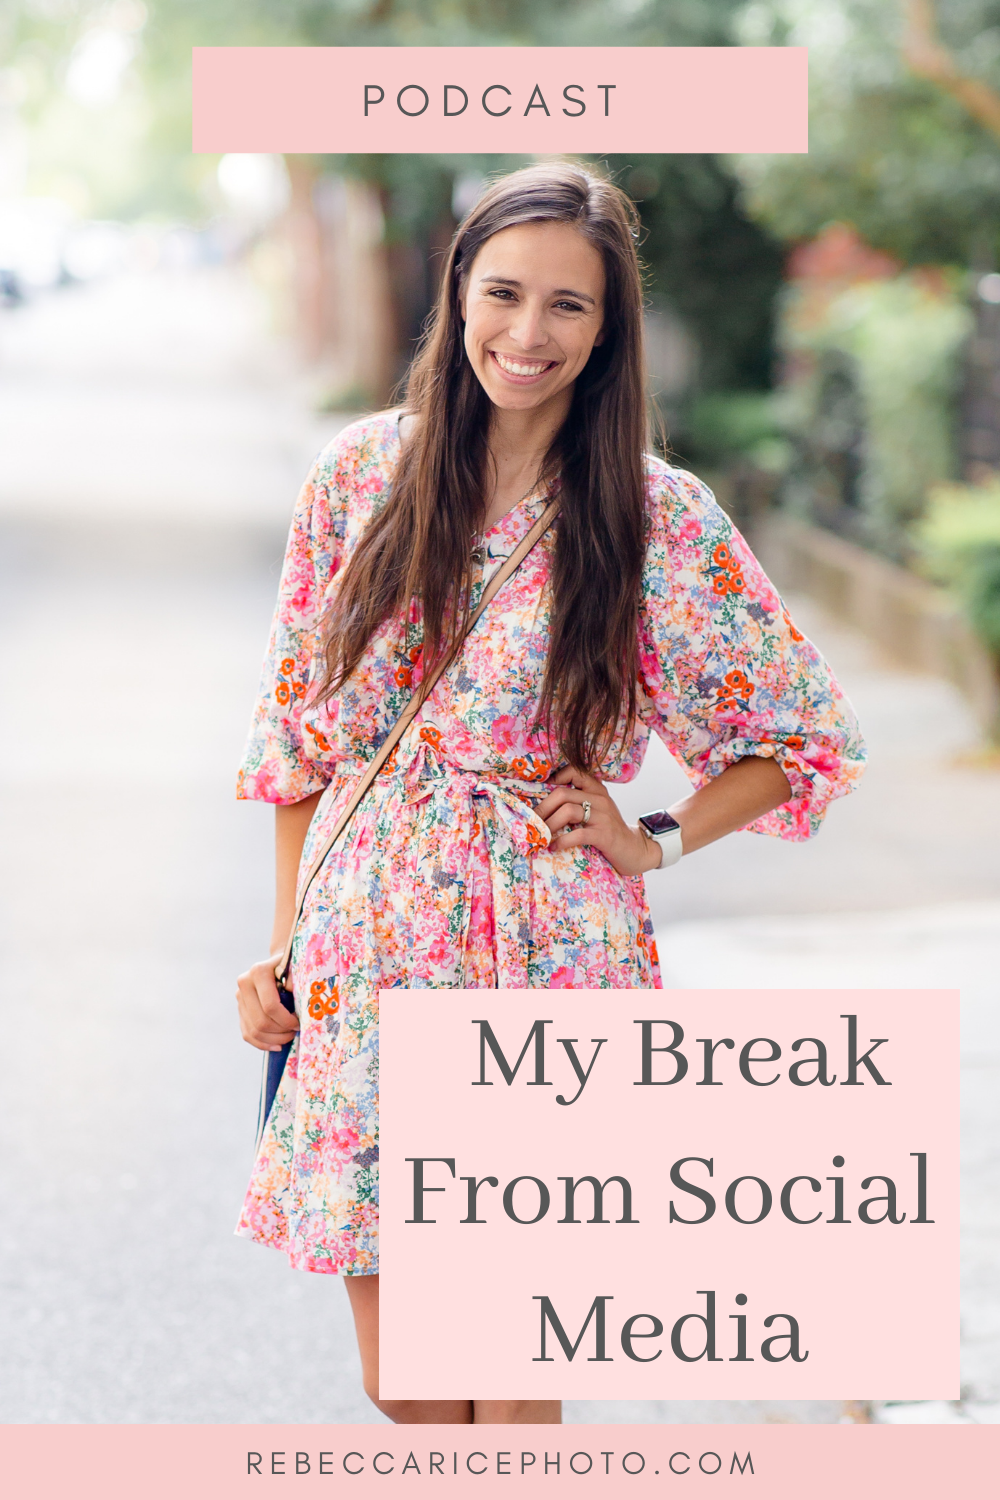 My Break From Social Media: Episode 35 of The Business Journey Podcast, Rebecca Rice shares about taking a break from social media